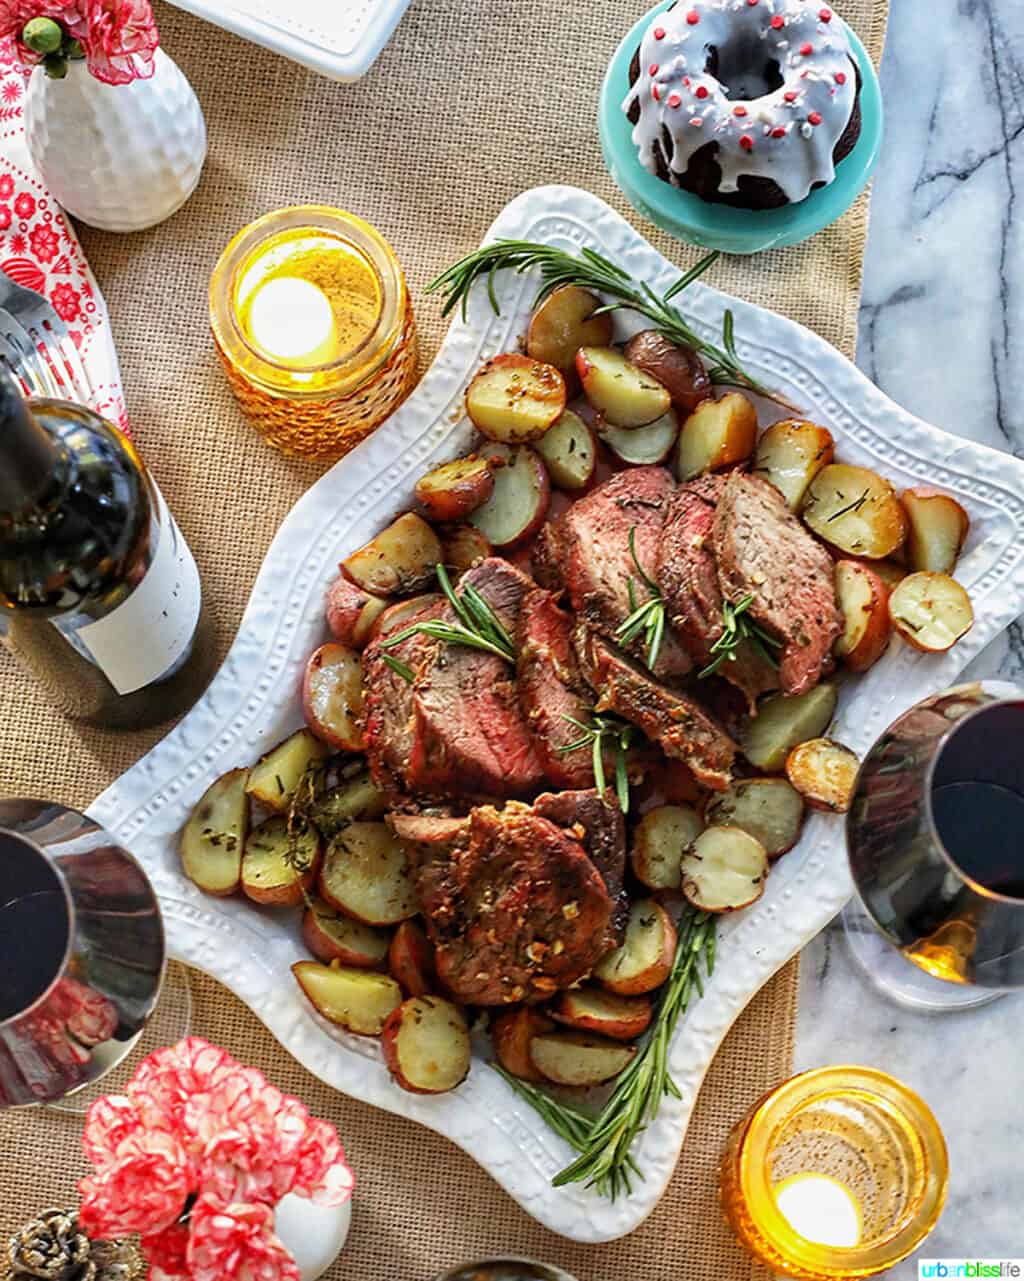 sirloin tip roast with glasses of wine